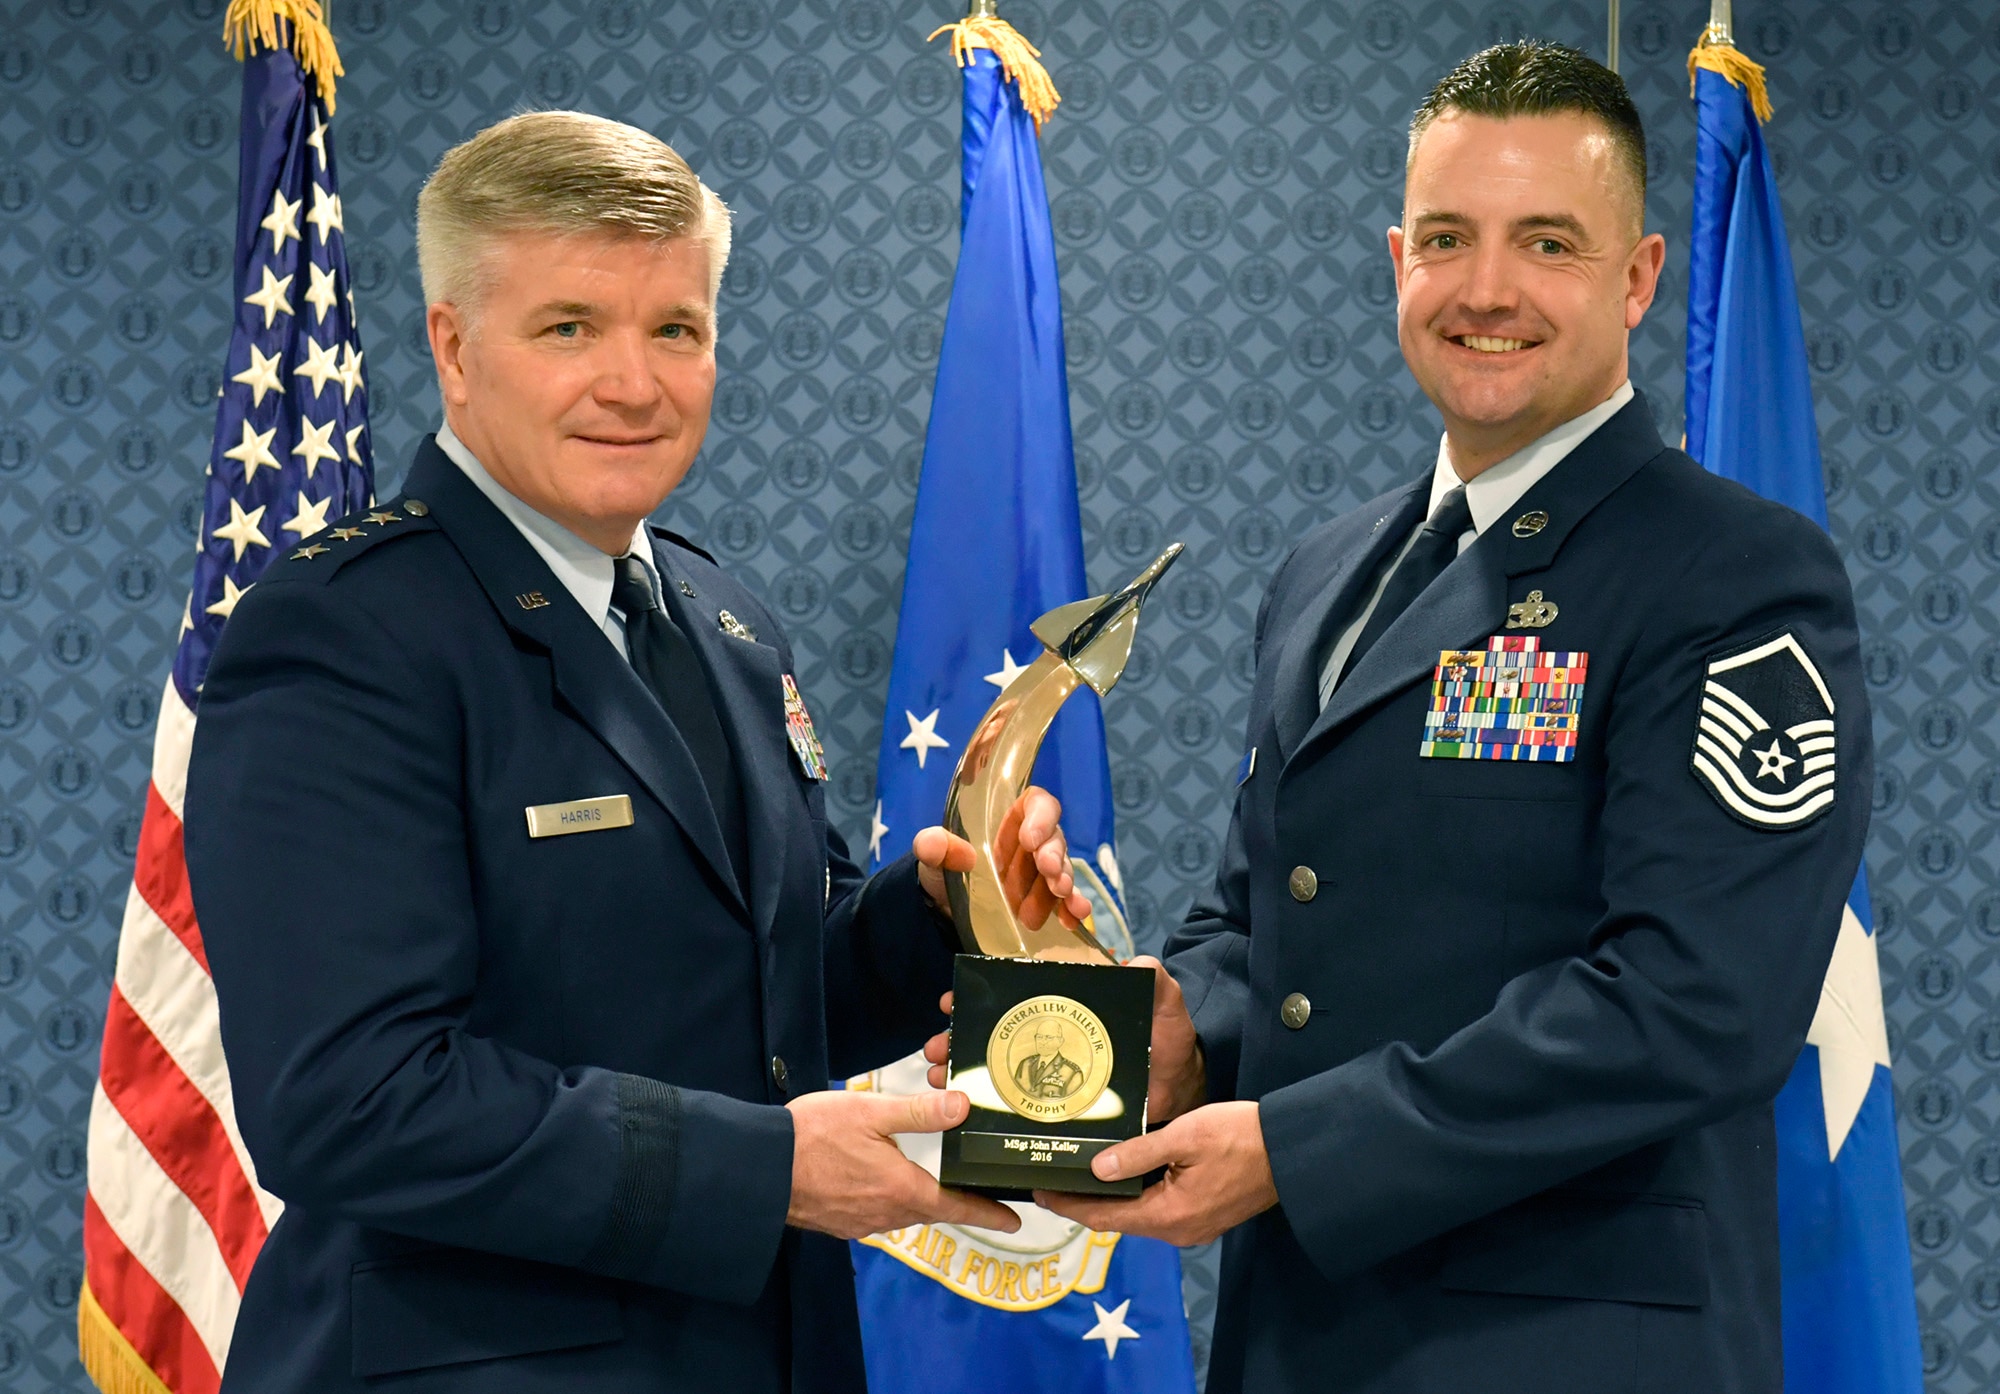 Lt. Gen. Jerry Harris, the deputy chief of staff for strategic plans, programs and requirements, presents Master Sgt. John Kelly the Gen. Lew Allen Jr. Trophy for 2016, during a ceremony at the Pentagon, April 21, 2017. (U.S. Air Force photo/Wayne A. Clark)